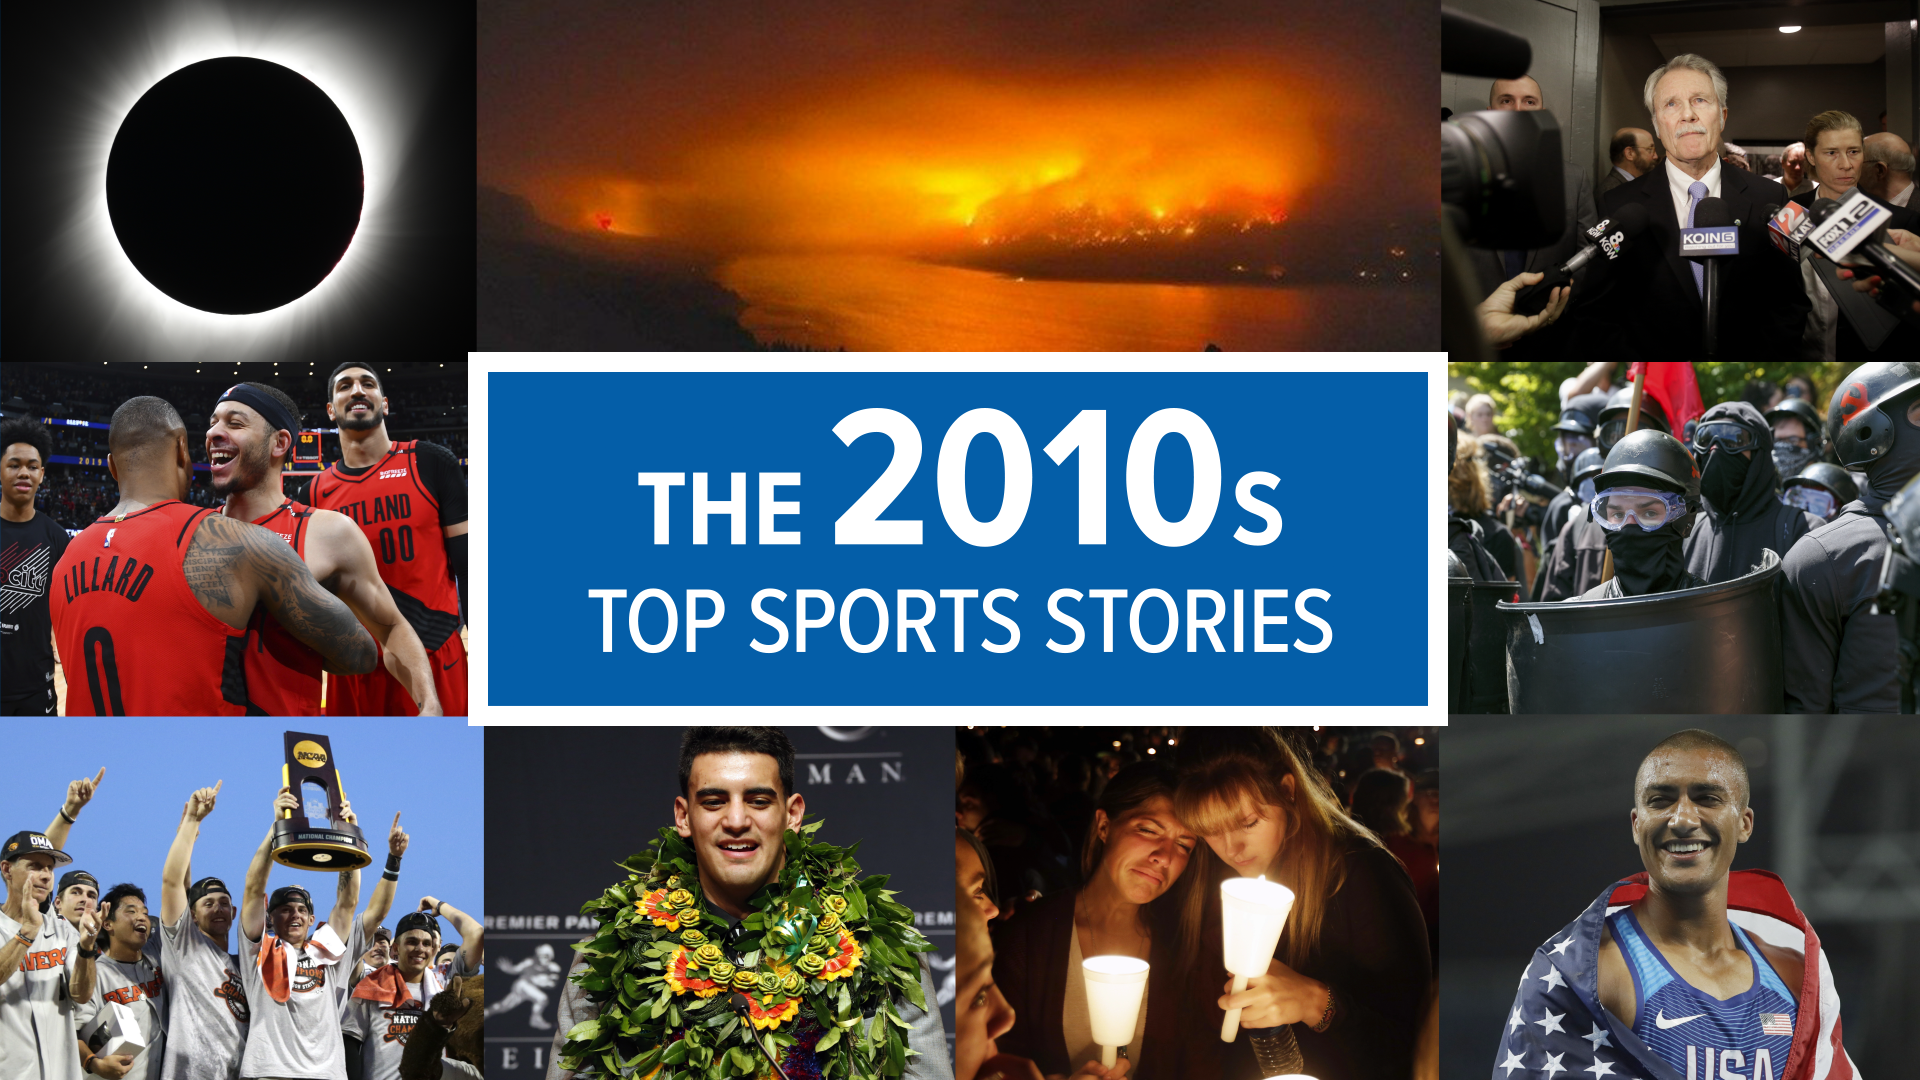 A look back at the top 5 sports stories of the last decade.